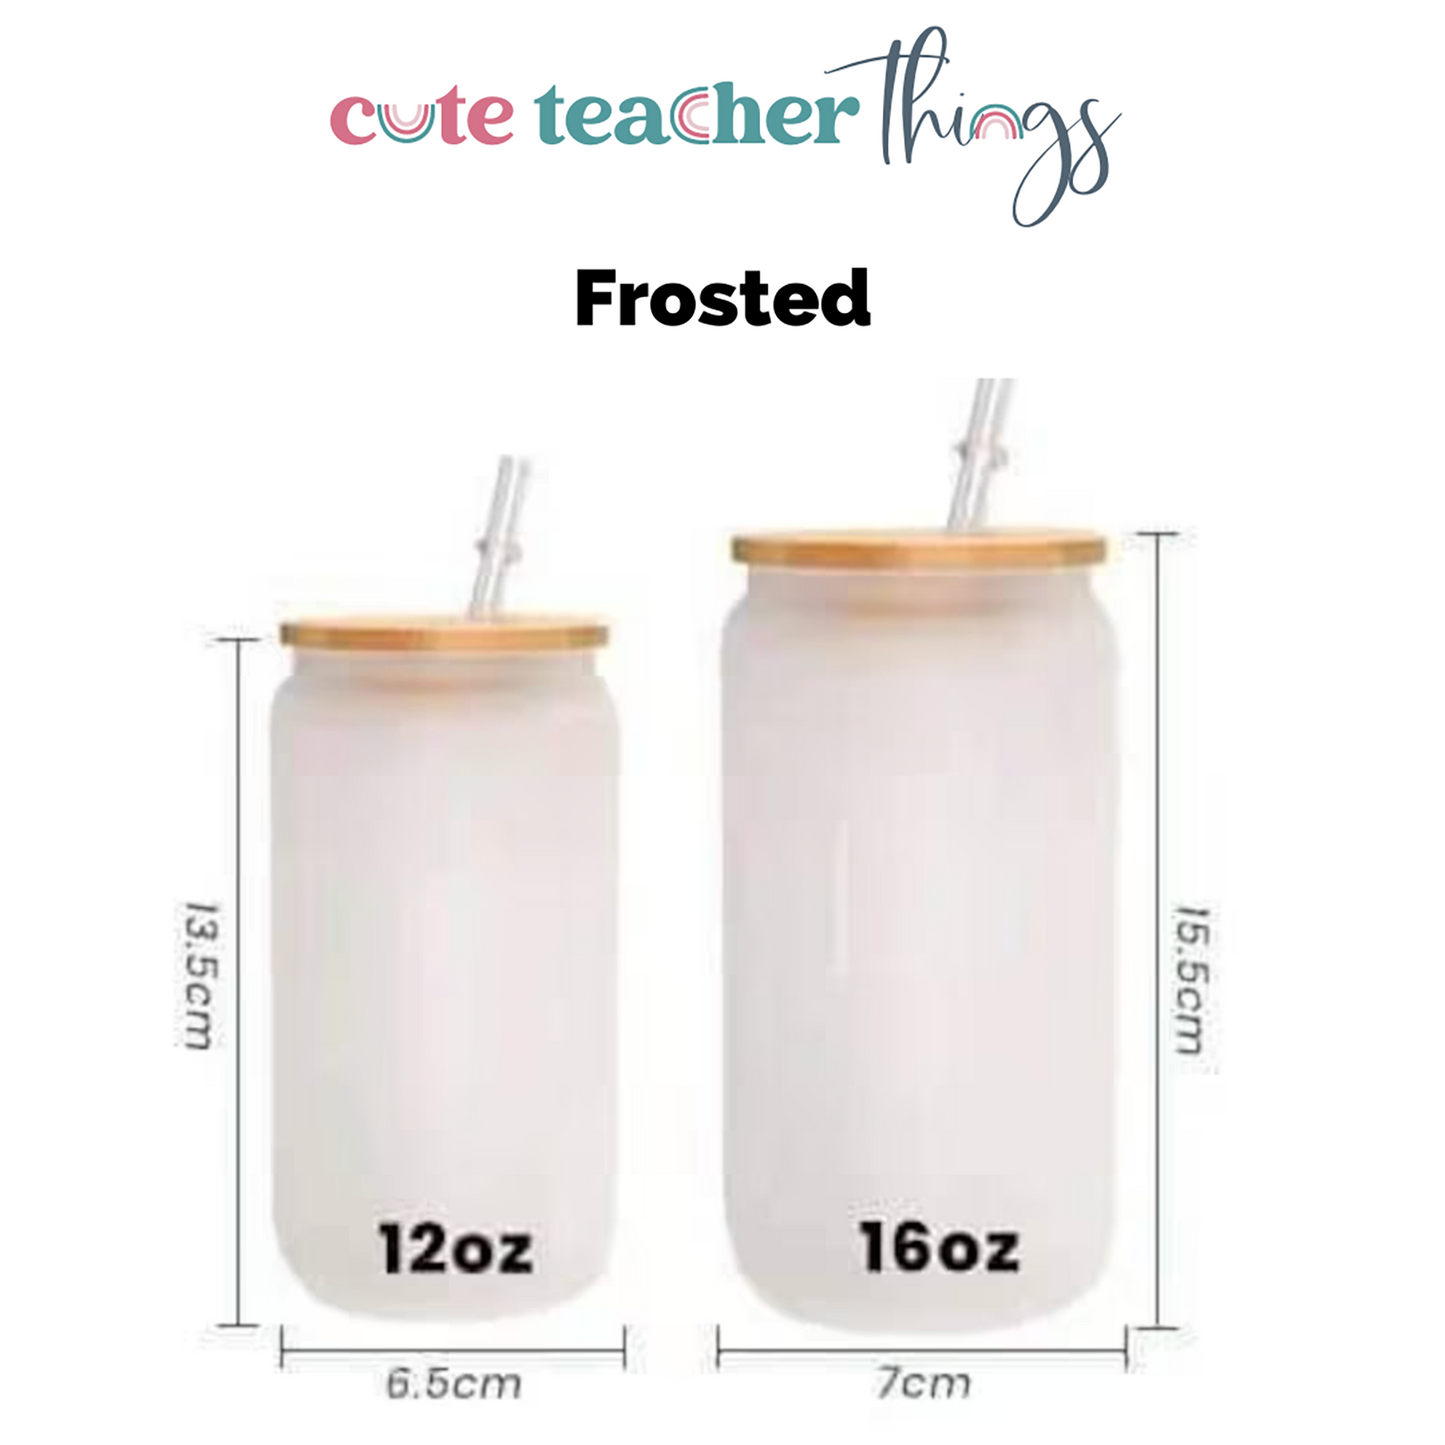 frosted glass cup dimensions